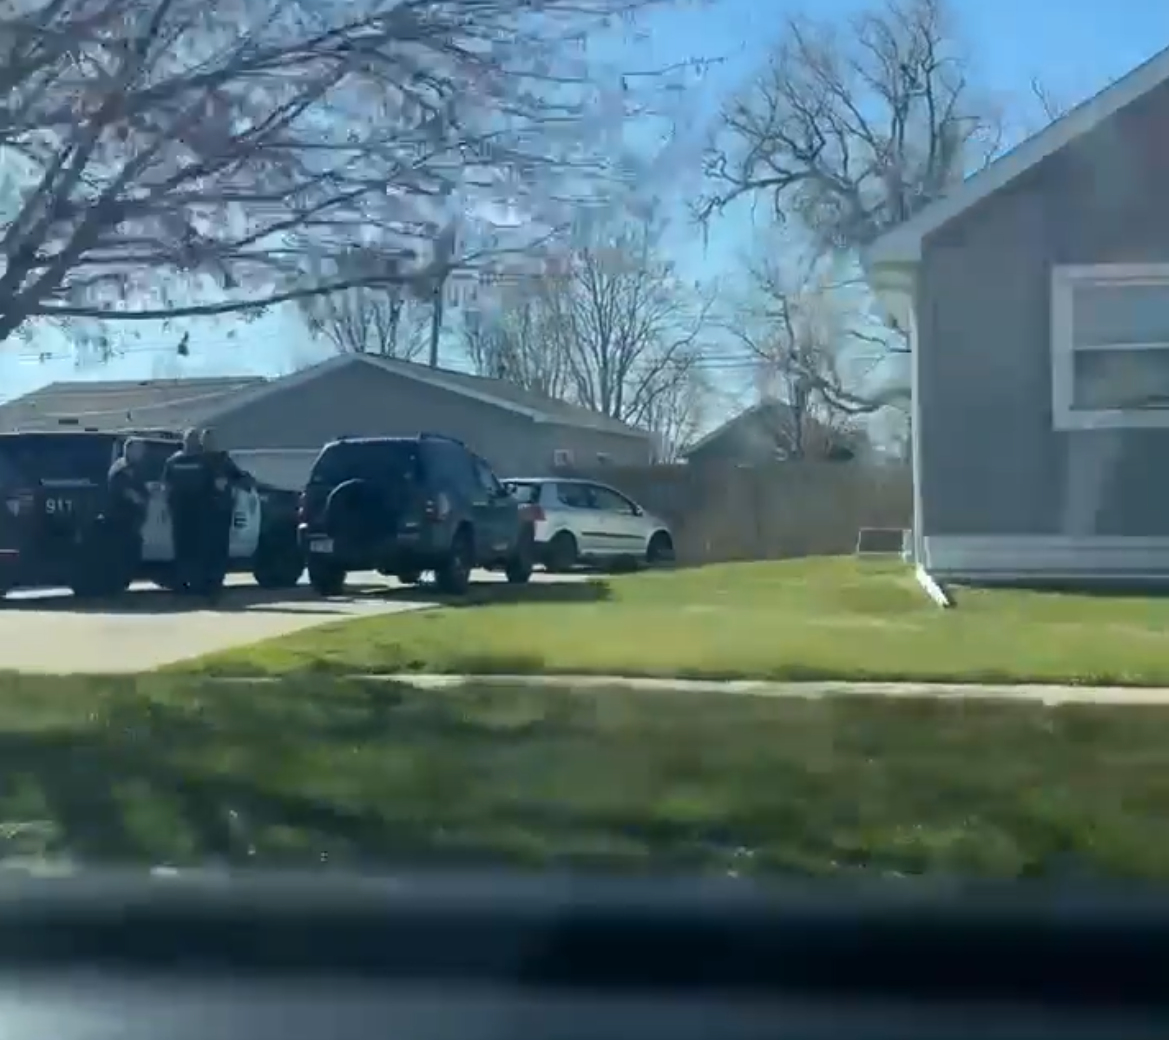 BurglaryArea/Location: 1500 Block of Ave B User Submitted Photos By: Austin JahnThank You AustinResponding: Council Bluffs PoliceCaller states she looked outside and notices someone sleeping in the back seat of her car.